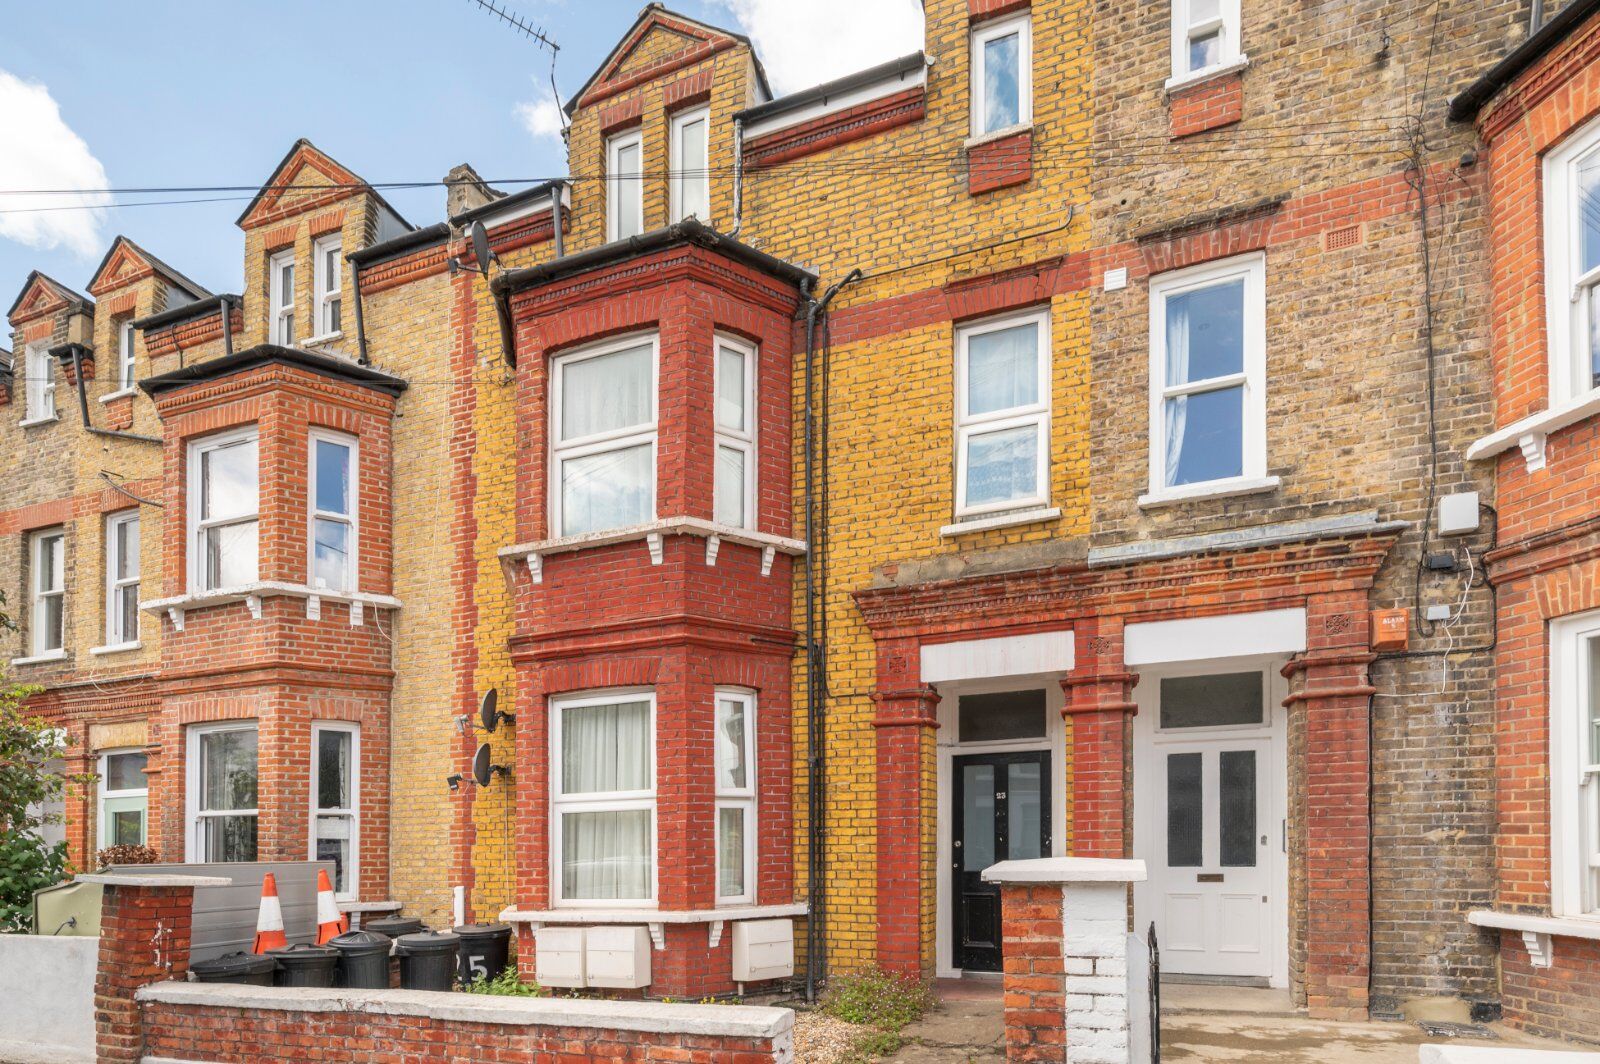 6 bedroom mid terraced house for sale Mexfield Road, London, SW15, main image